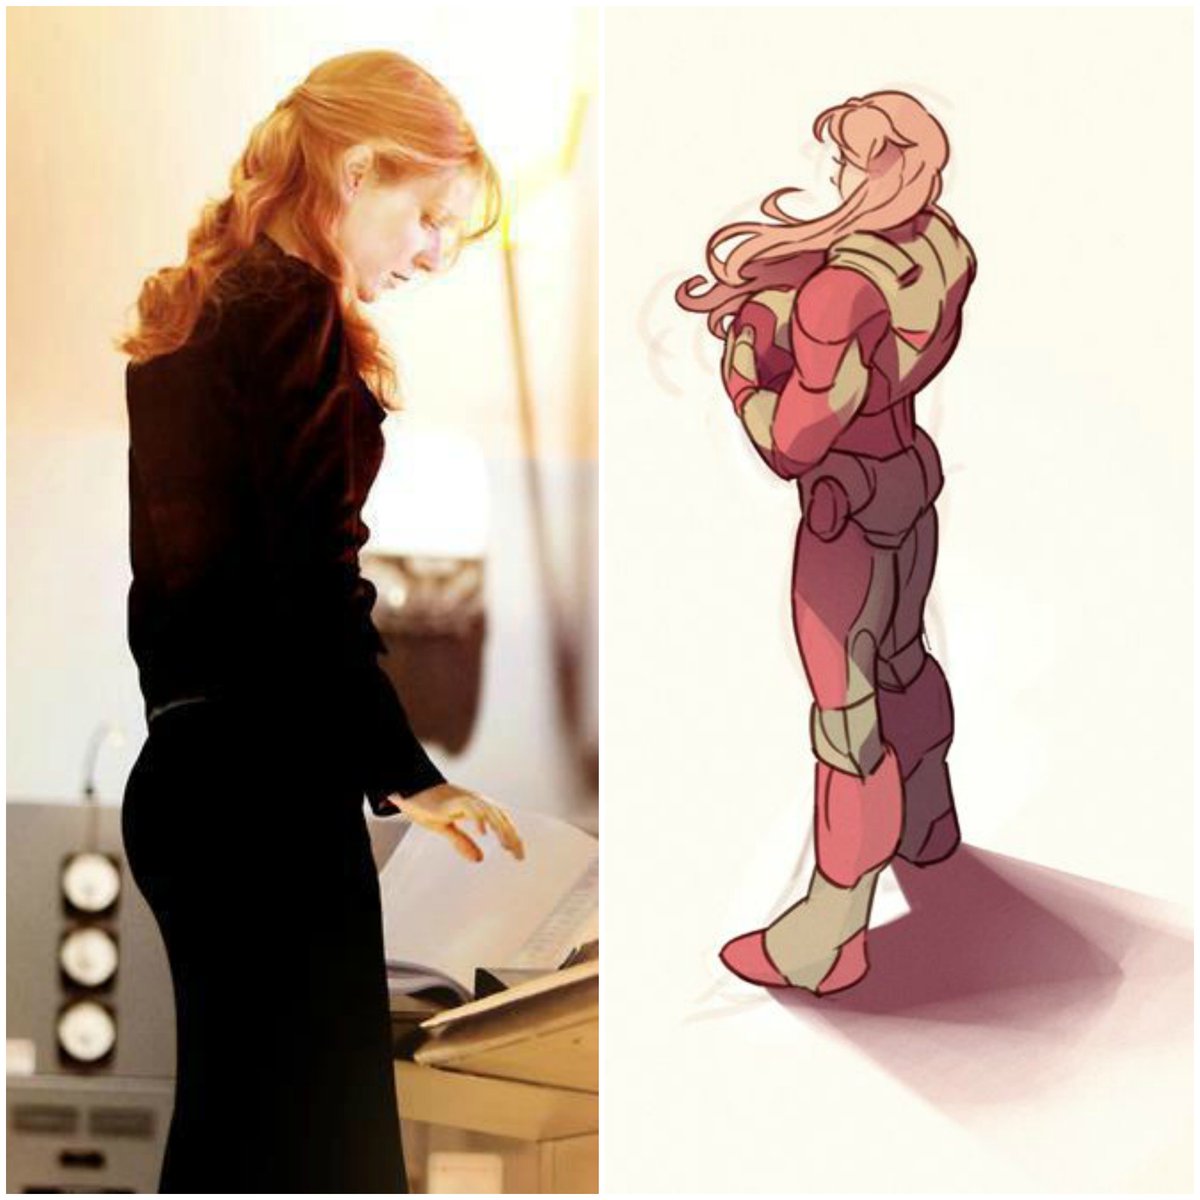 Not New to Pepper Potts or Verse. 